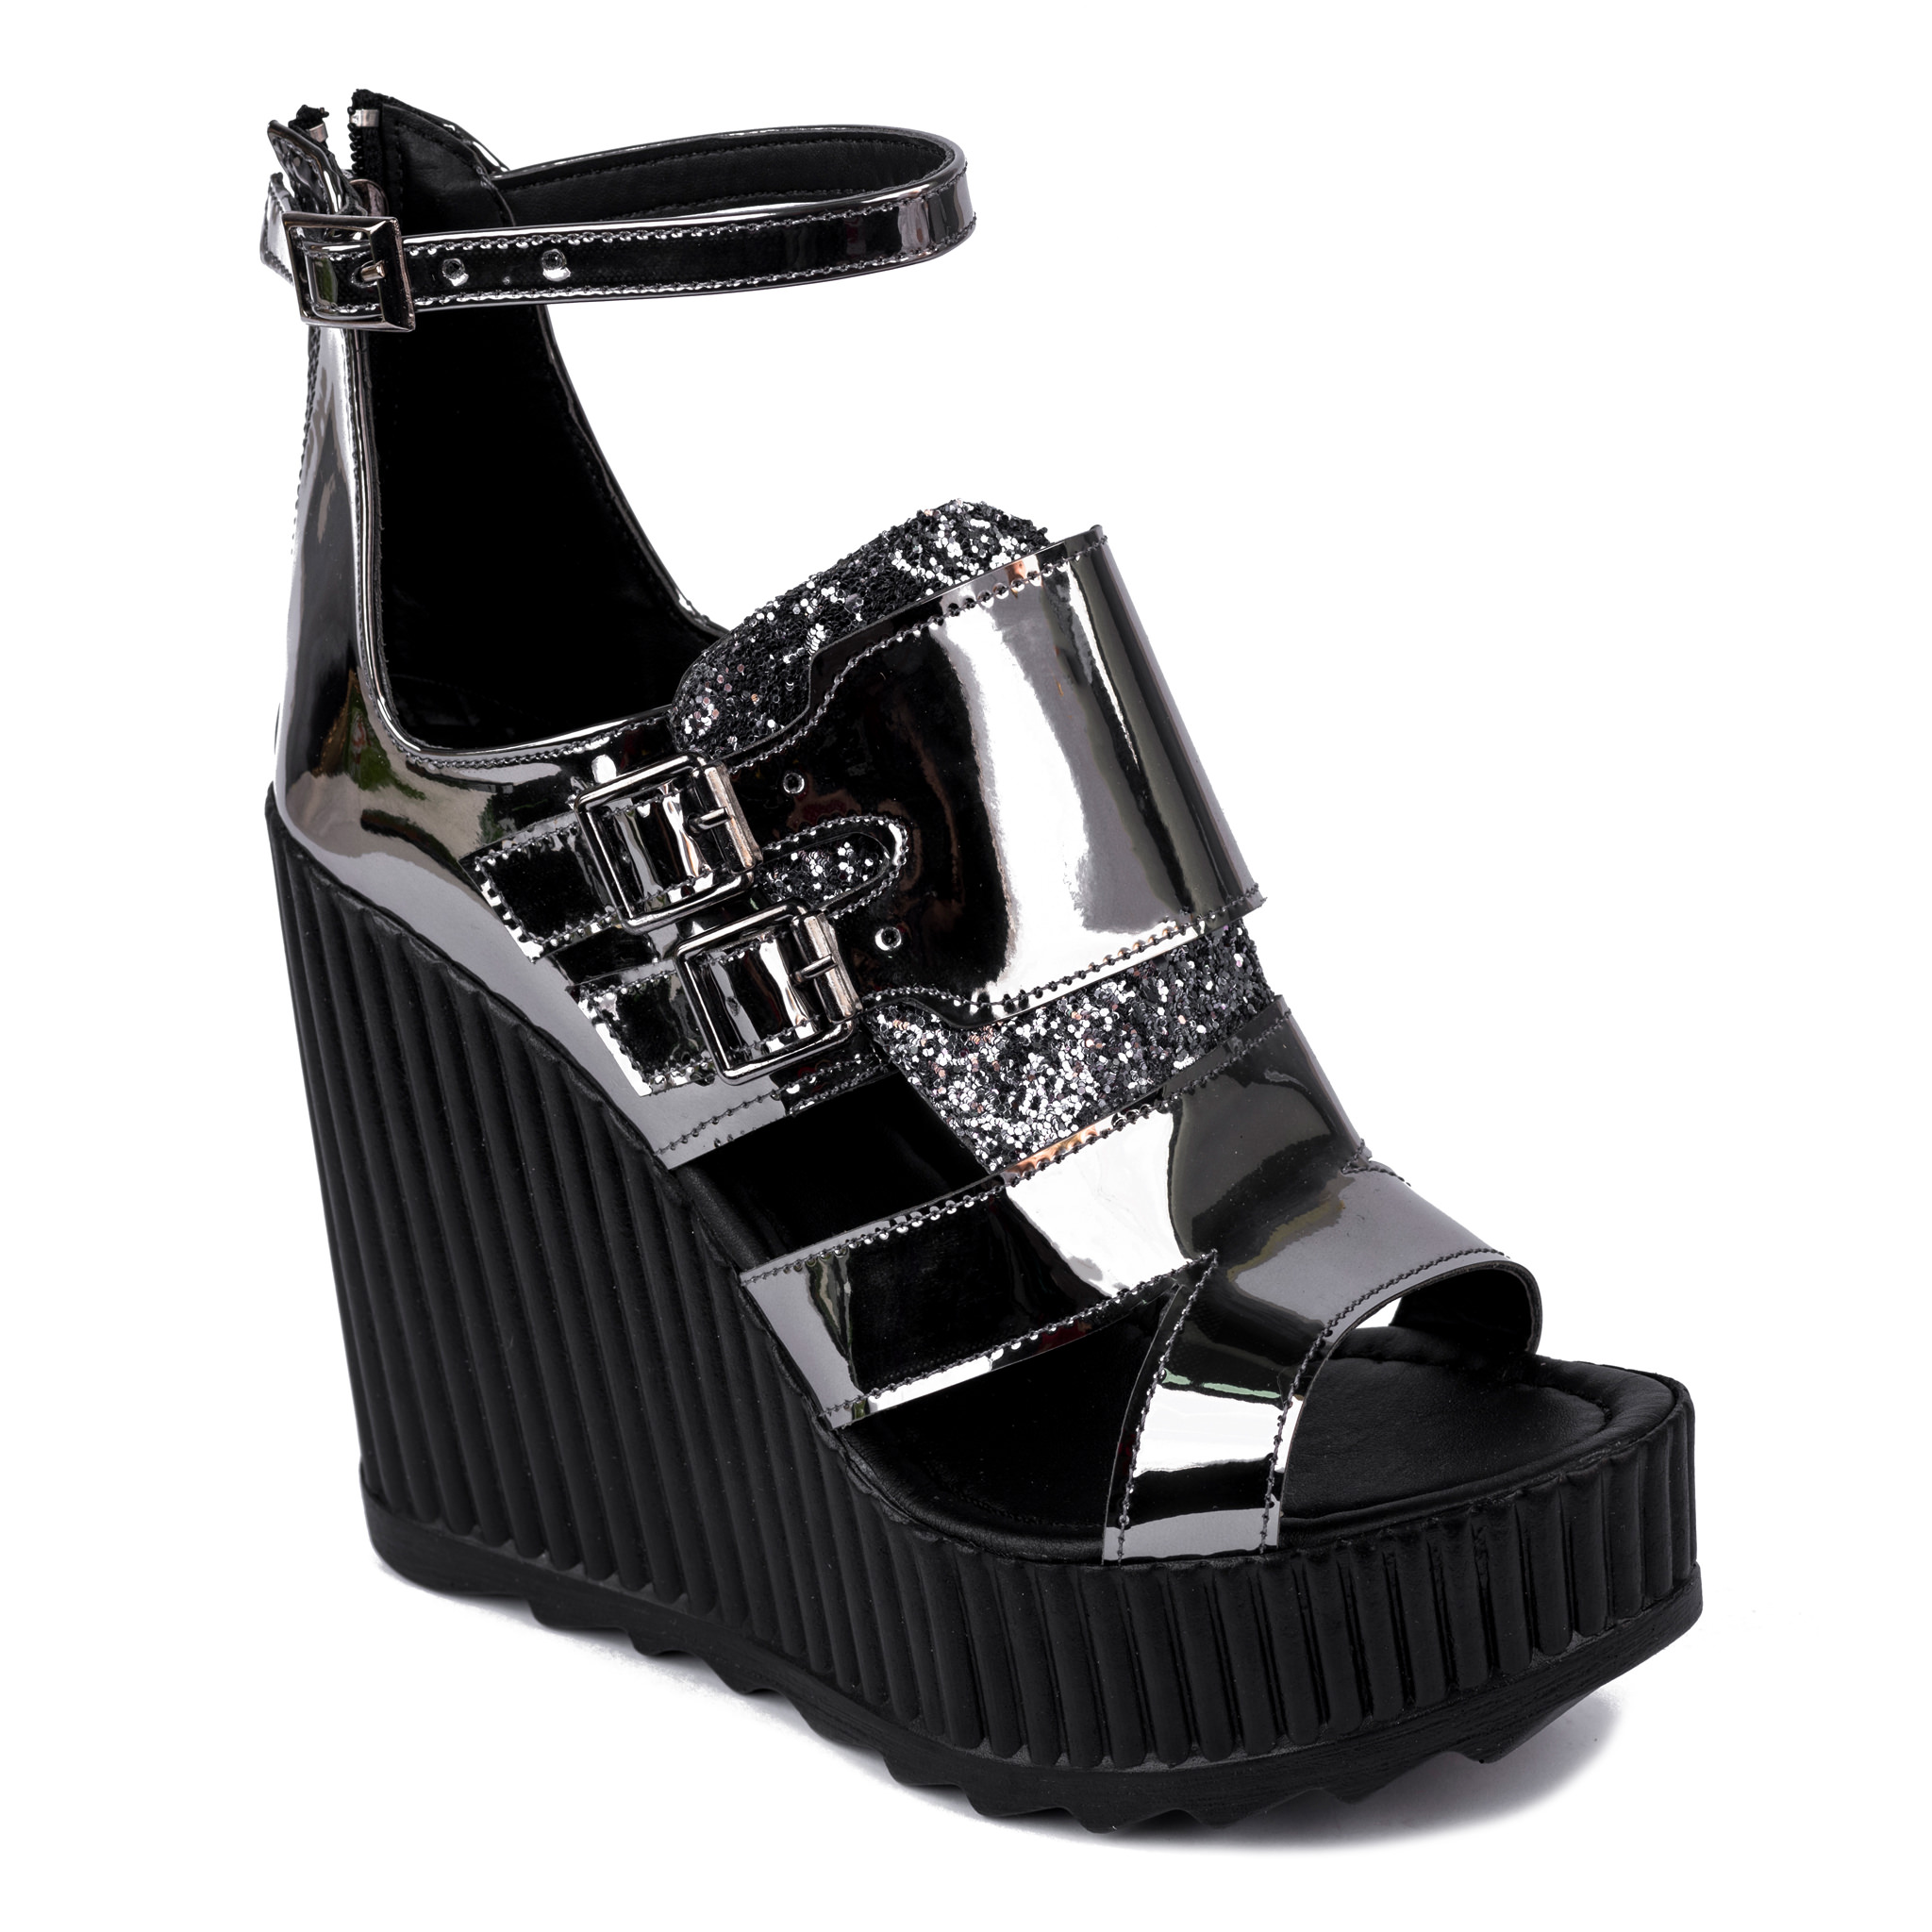 PATENT WEDGE SANDALS WITH BELTS - GRAPHITE